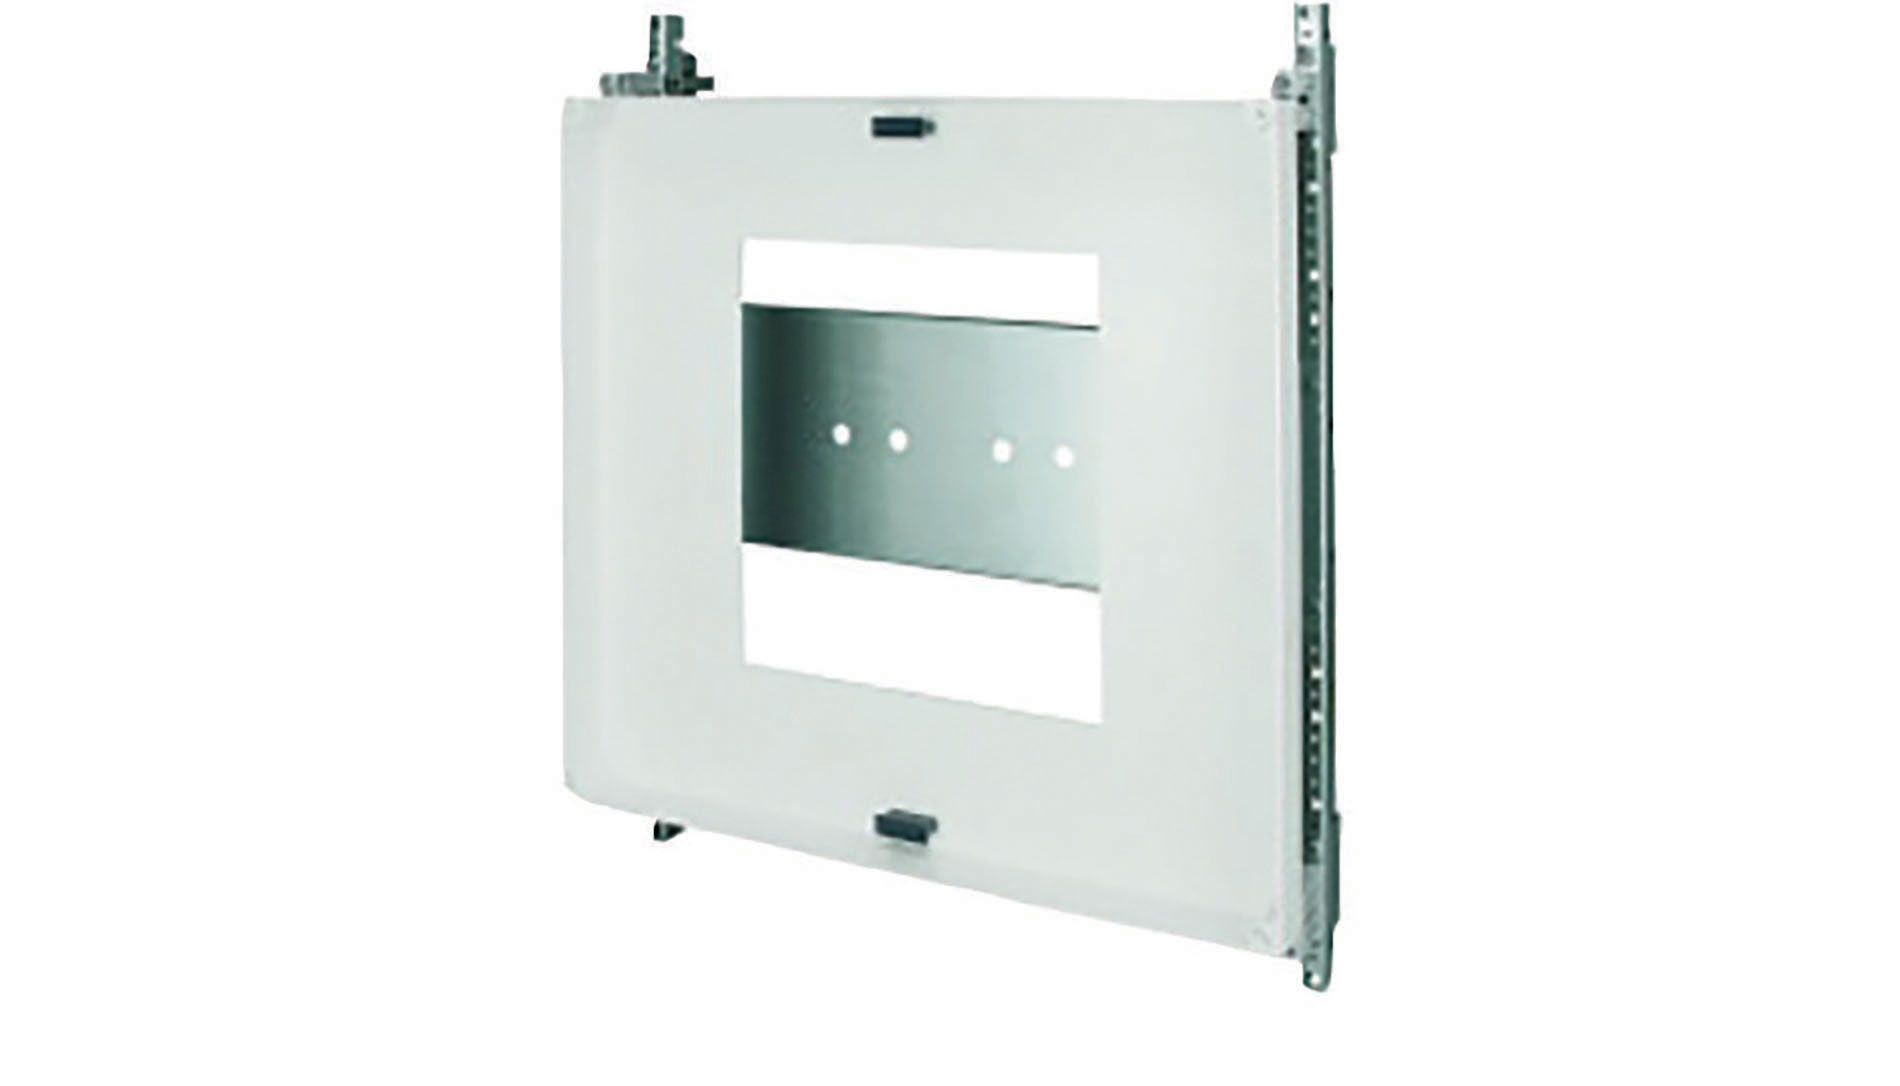 Steel cover plate mounting bracket. Image by Eaton.